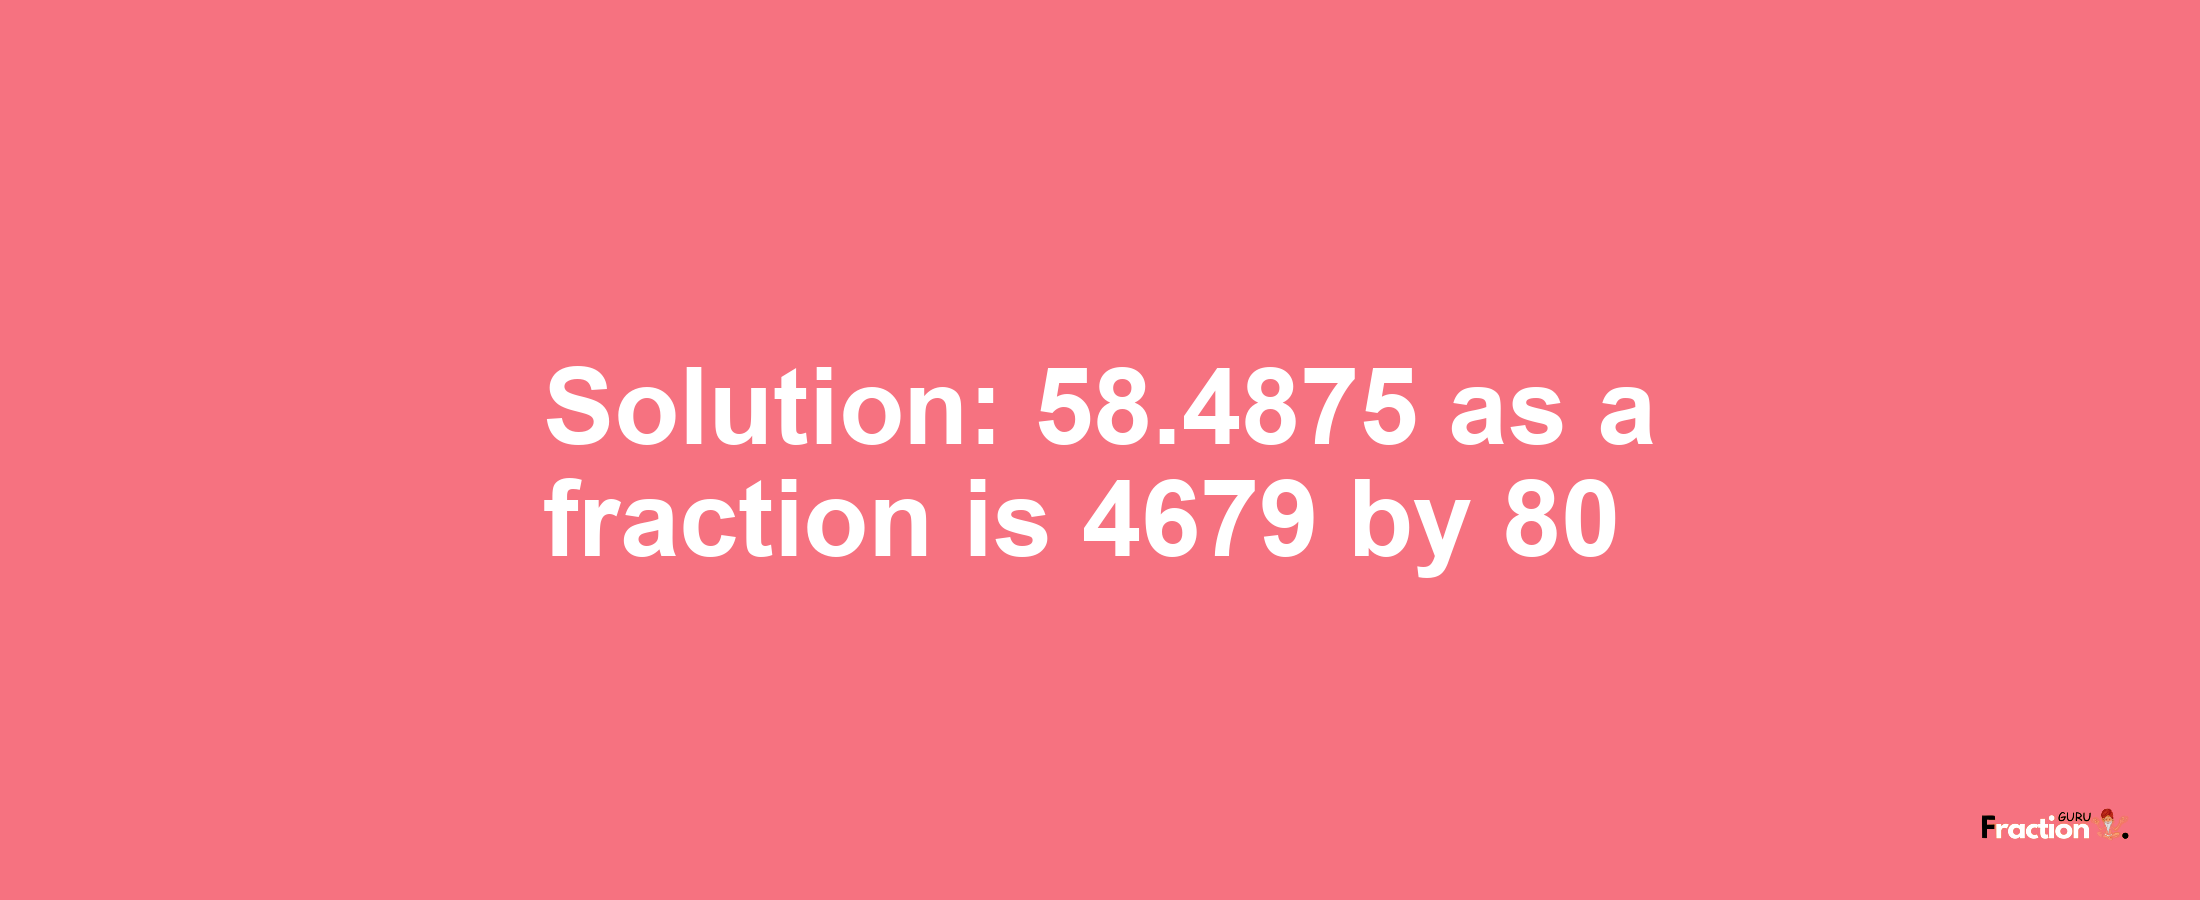 Solution:58.4875 as a fraction is 4679/80